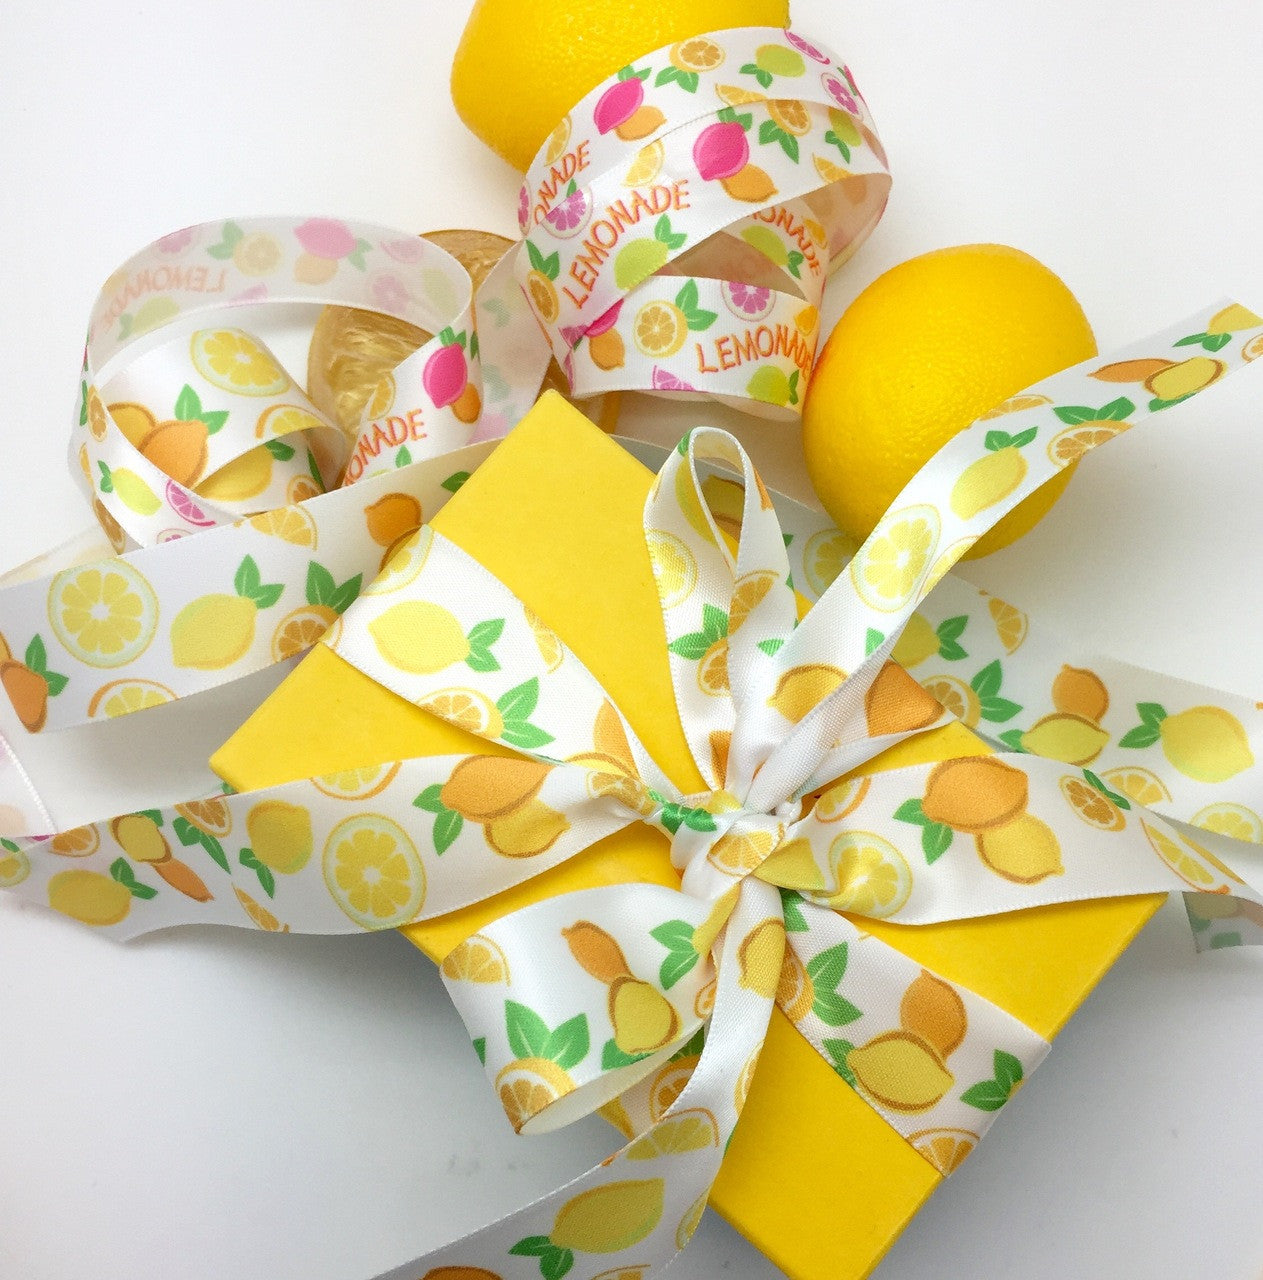 Our lemons and lemonade ribbons pair beautifully! Adding these ribbons to a Summer party will brighten anyone's day!!